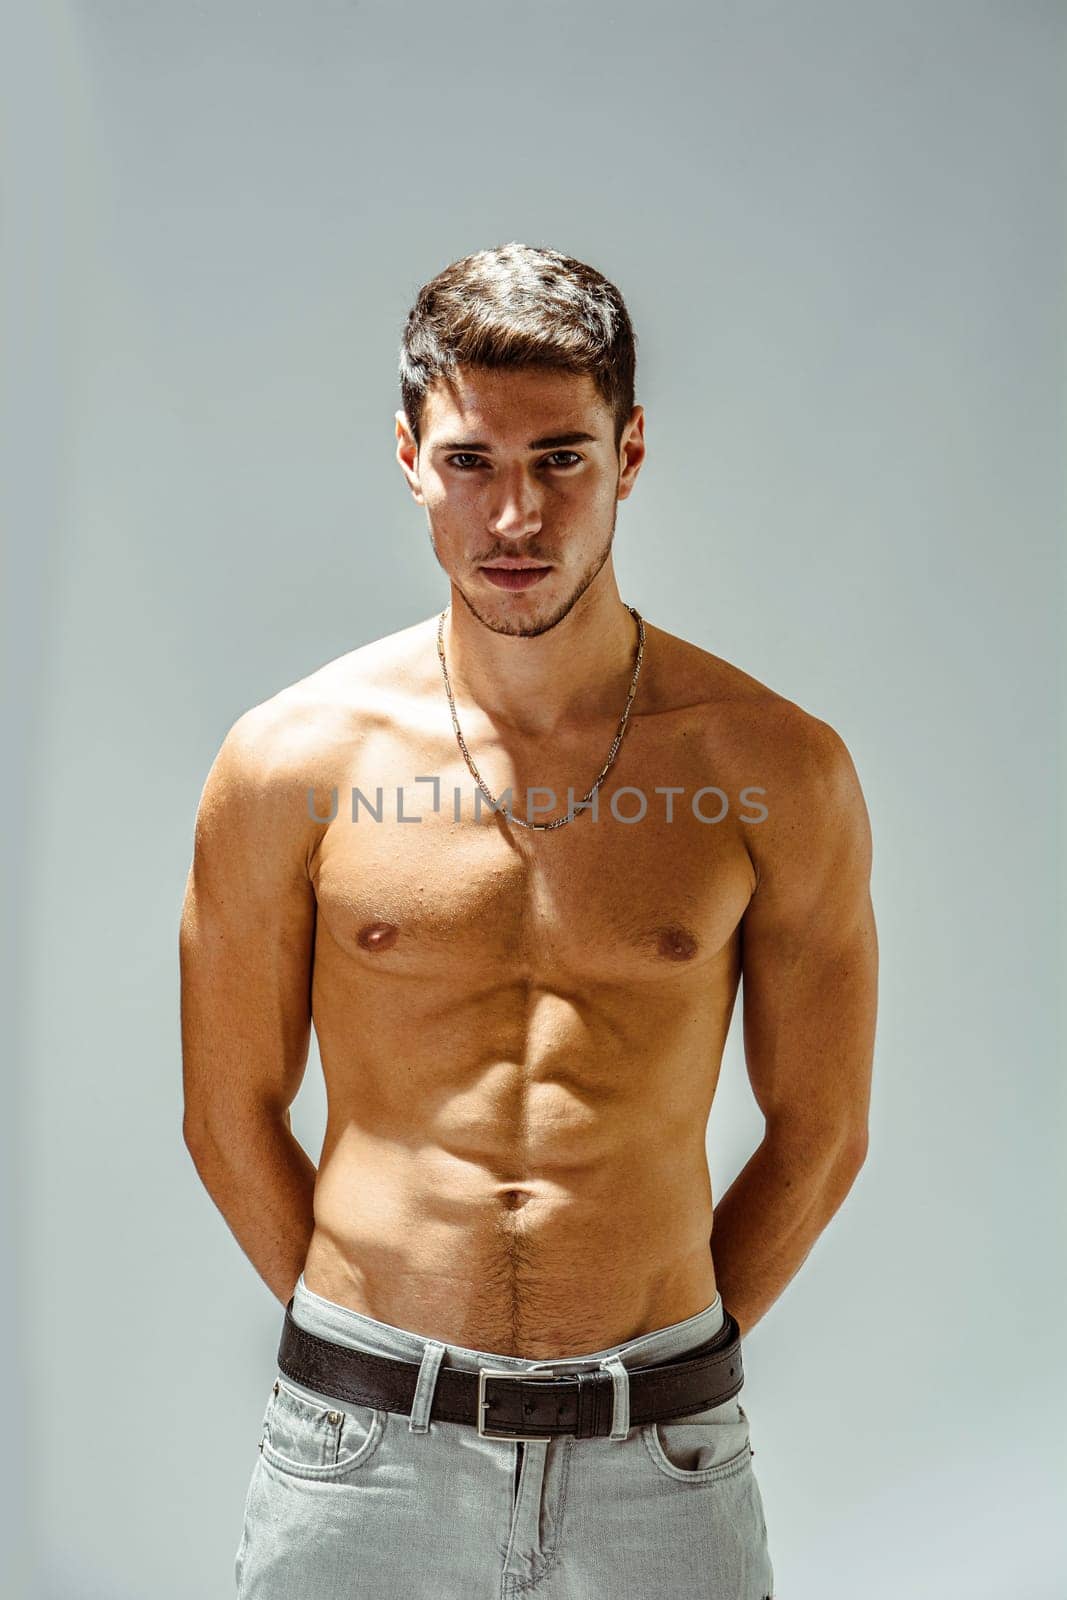 A shirtless handsome young man posing for a picture showing muscular torso, looking at camera, wearing grey jeans